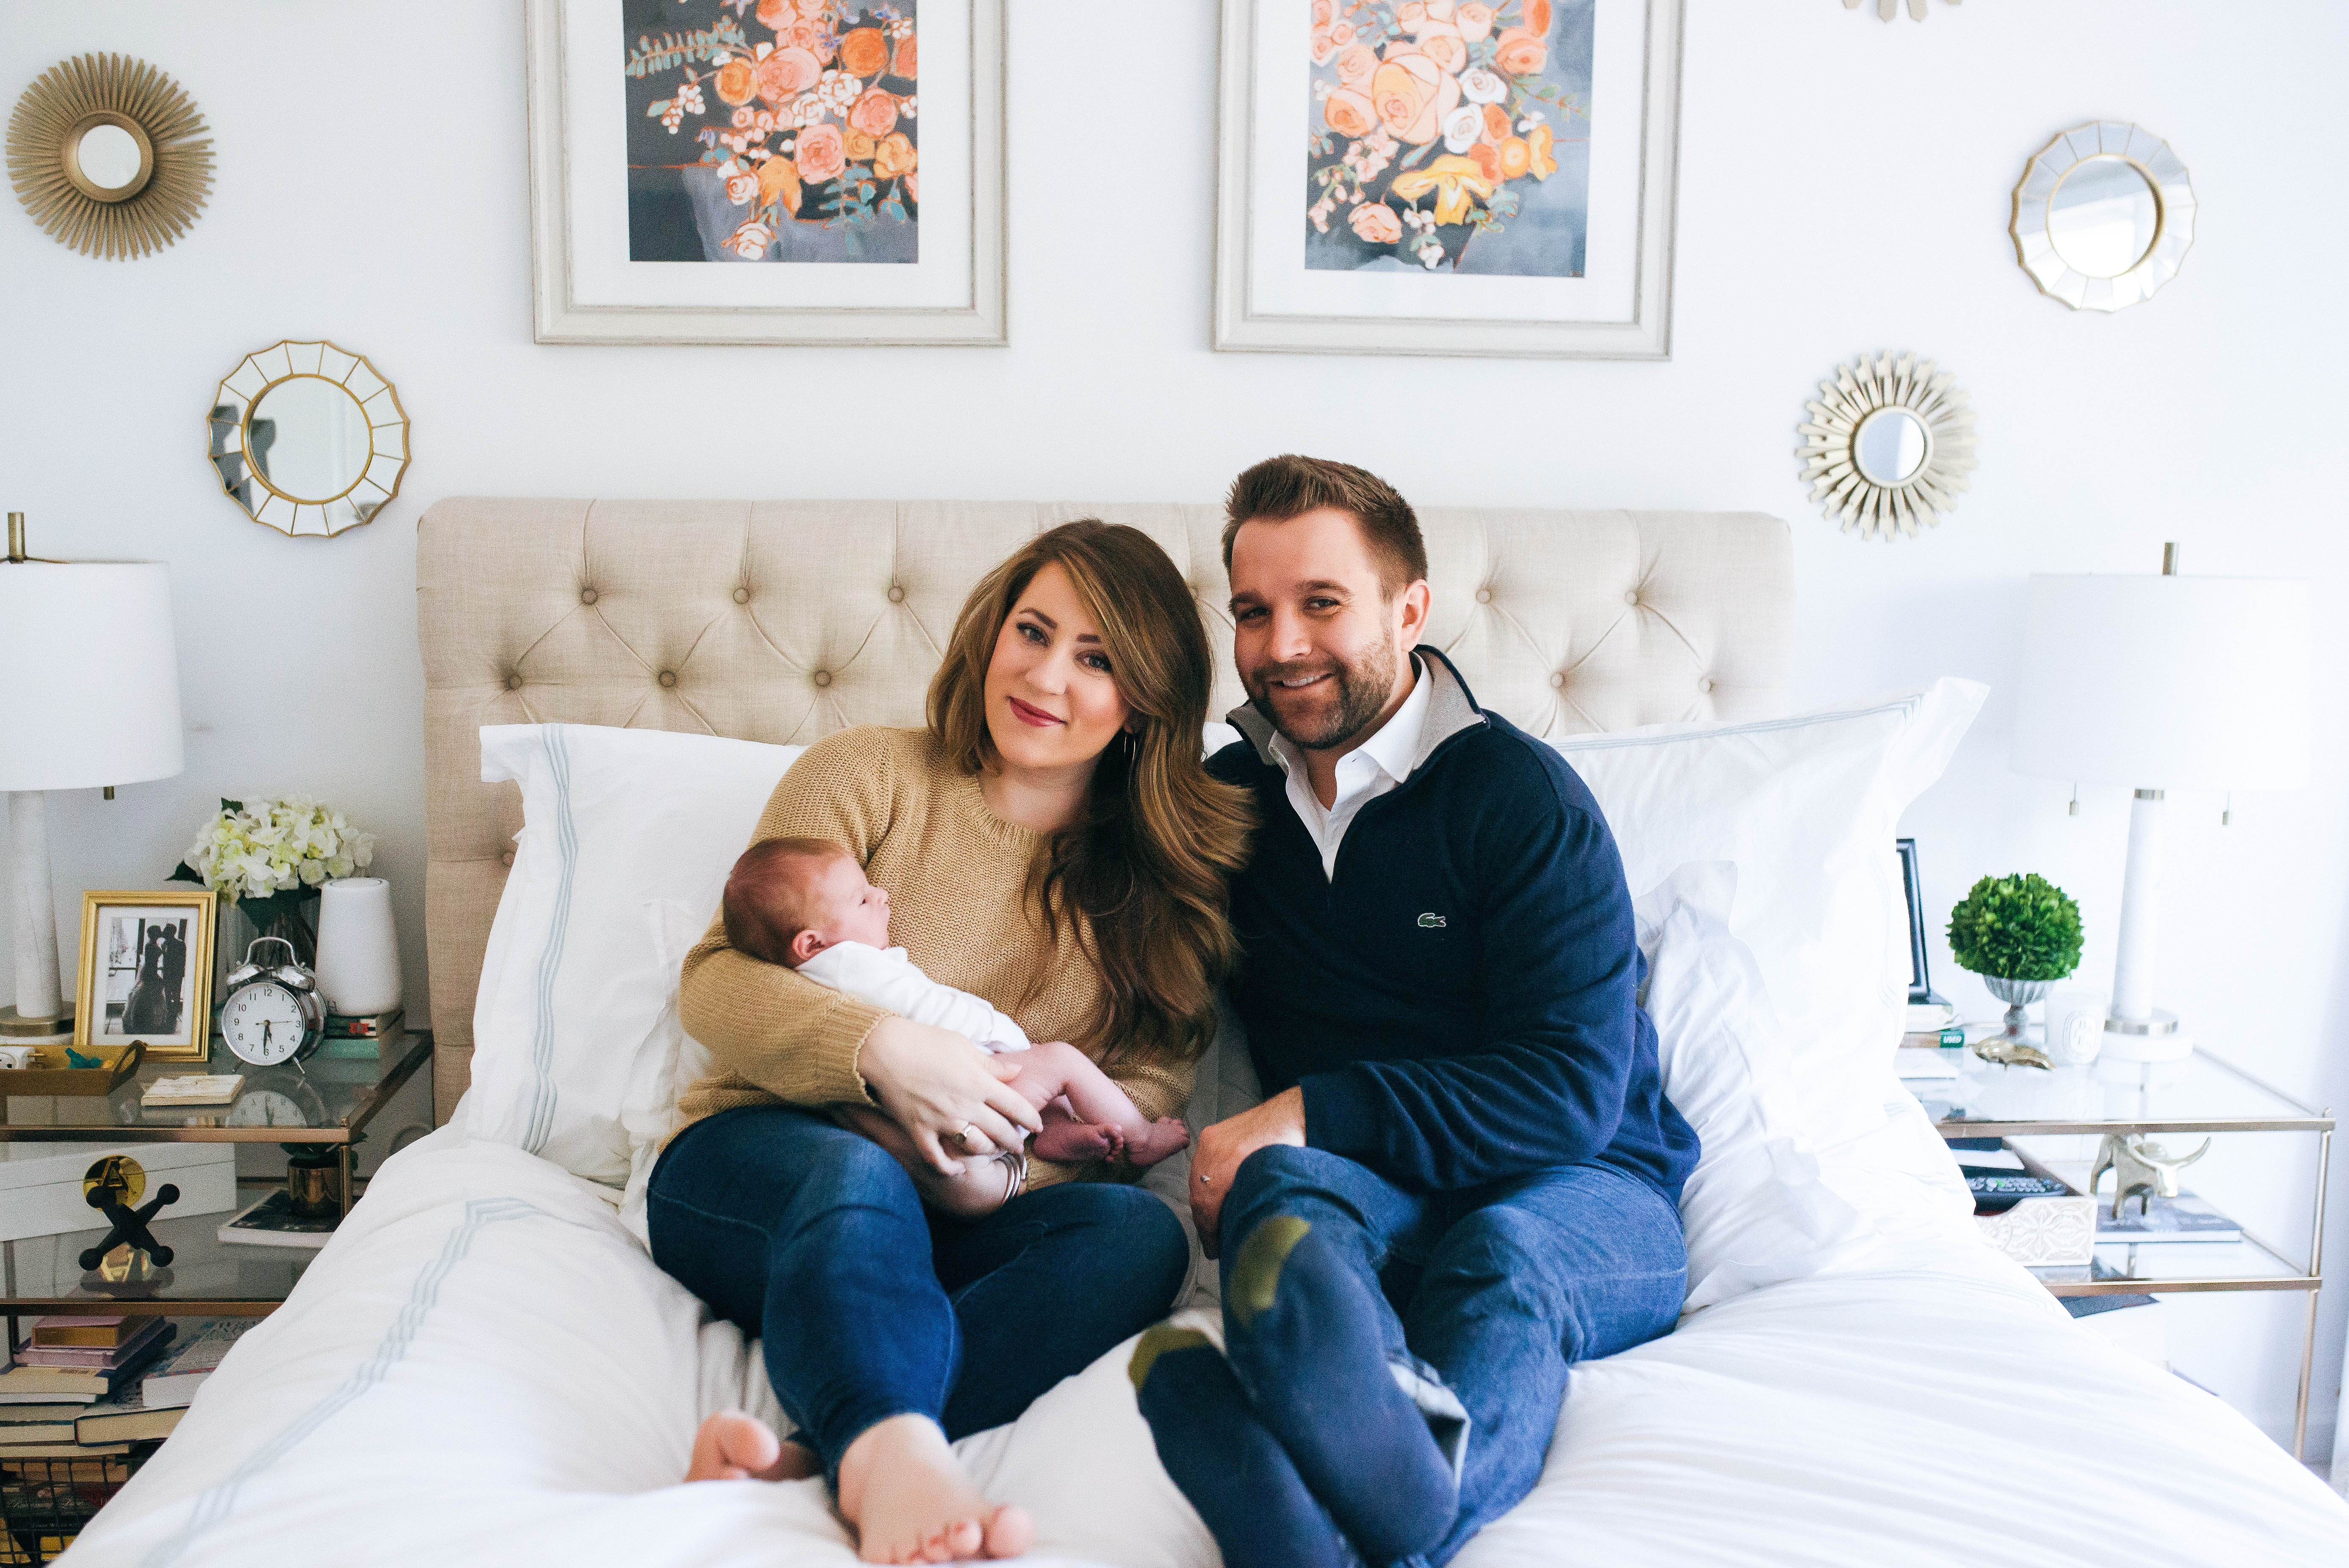 Poppy's Birth Announcements by popular North Carolina lifestyle blogger Coffee Beans and Bobby Pins